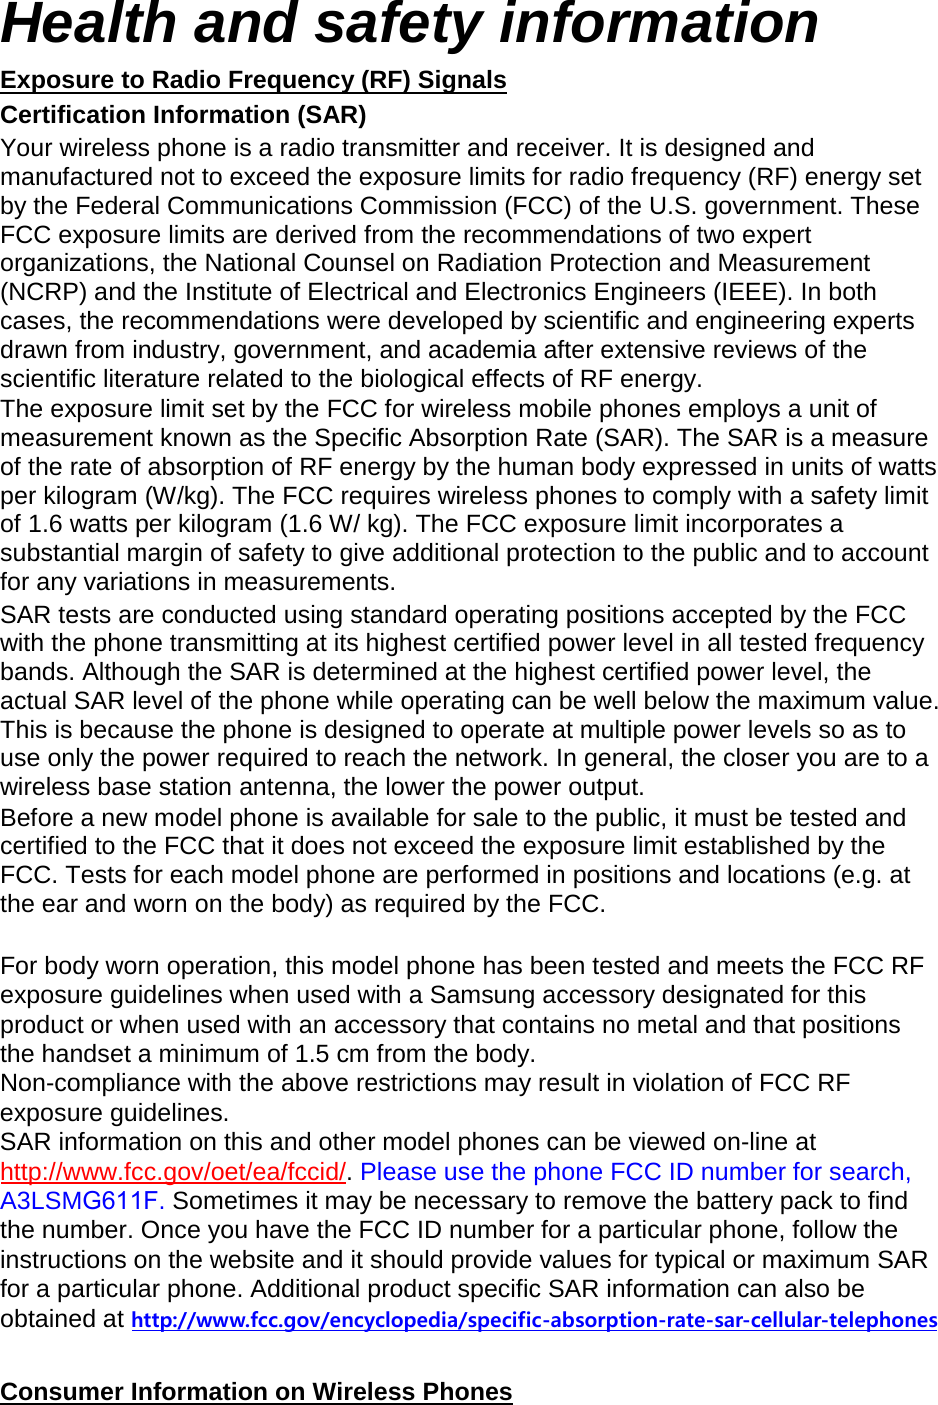 Health and safety information Exposure to Radio Frequency (RF) Signals Certification Information (SAR) Your wireless phone is a radio transmitter and receiver. It is designed and manufactured not to exceed the exposure limits for radio frequency (RF) energy set by the Federal Communications Commission (FCC) of the U.S. government. These FCC exposure limits are derived from the recommendations of two expert organizations, the National Counsel on Radiation Protection and Measurement (NCRP) and the Institute of Electrical and Electronics Engineers (IEEE). In both cases, the recommendations were developed by scientific and engineering experts drawn from industry, government, and academia after extensive reviews of the scientific literature related to the biological effects of RF energy. The exposure limit set by the FCC for wireless mobile phones employs a unit of measurement known as the Specific Absorption Rate (SAR). The SAR is a measure of the rate of absorption of RF energy by the human body expressed in units of watts per kilogram (W/kg). The FCC requires wireless phones to comply with a safety limit of 1.6 watts per kilogram (1.6 W/ kg). The FCC exposure limit incorporates a substantial margin of safety to give additional protection to the public and to account for any variations in measurements. SAR tests are conducted using standard operating positions accepted by the FCC with the phone transmitting at its highest certified power level in all tested frequency bands. Although the SAR is determined at the highest certified power level, the actual SAR level of the phone while operating can be well below the maximum value. This is because the phone is designed to operate at multiple power levels so as to use only the power required to reach the network. In general, the closer you are to a wireless base station antenna, the lower the power output. Before a new model phone is available for sale to the public, it must be tested and certified to the FCC that it does not exceed the exposure limit established by the FCC. Tests for each model phone are performed in positions and locations (e.g. at the ear and worn on the body) as required by the FCC.     For body worn operation, this model phone has been tested and meets the FCC RF exposure guidelines when used with a Samsung accessory designated for this product or when used with an accessory that contains no metal and that positions the handset a minimum of 1.5 cm from the body.  Non-compliance with the above restrictions may result in violation of FCC RF exposure guidelines. SAR information on this and other model phones can be viewed on-line at http://www.fcc.gov/oet/ea/fccid/. Please use the phone FCC ID number for search, A3LSMG611F. Sometimes it may be necessary to remove the battery pack to find the number. Once you have the FCC ID number for a particular phone, follow the instructions on the website and it should provide values for typical or maximum SAR for a particular phone. Additional product specific SAR information can also be obtained at http://www.fcc.gov/encyclopedia/specific-absorption-rate-sar-cellular-telephonesConsumer Information on Wireless Phones 